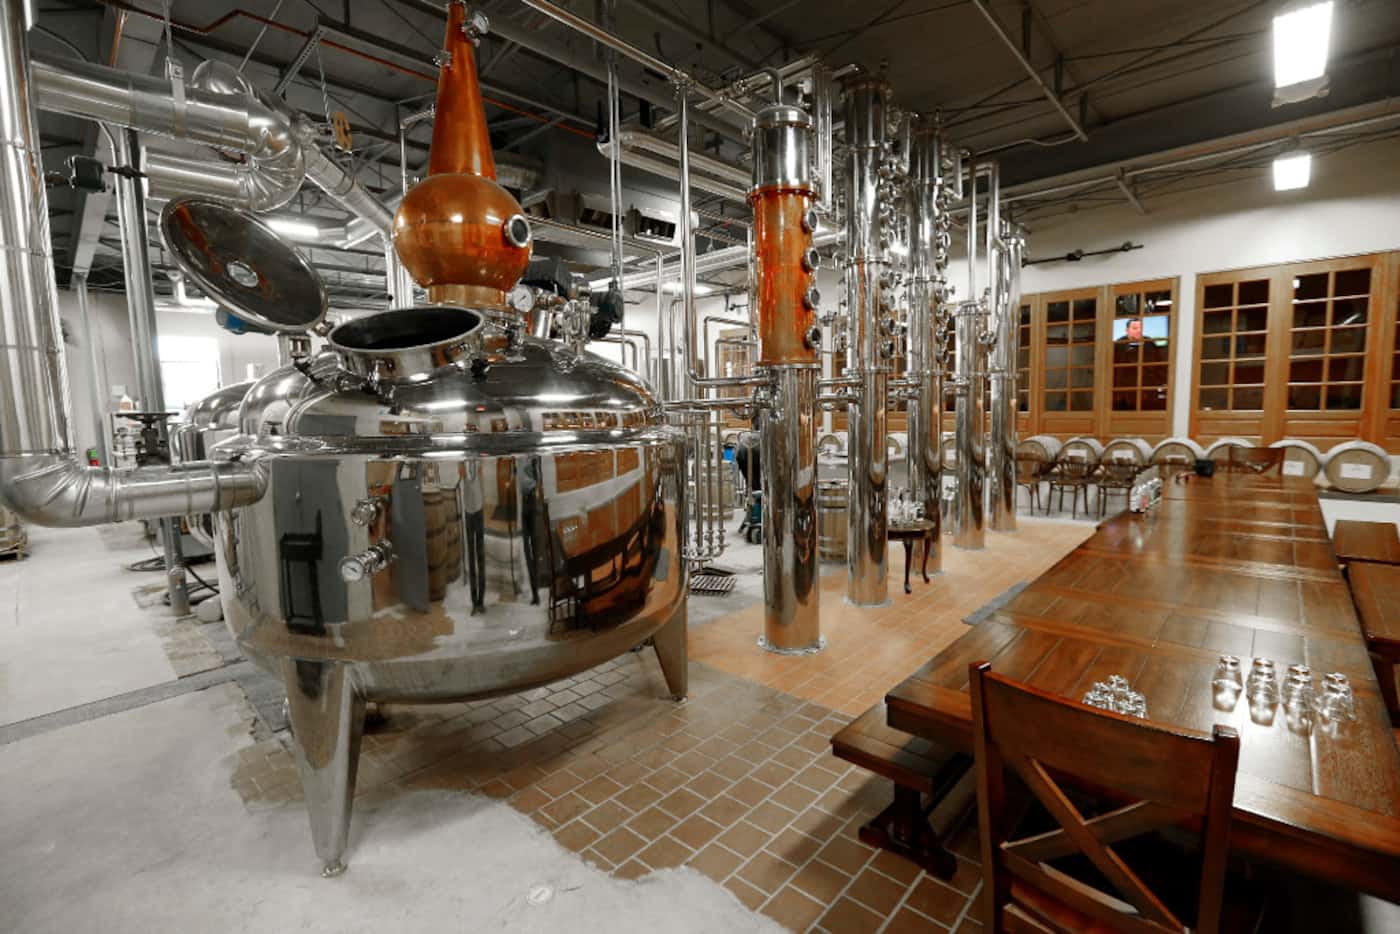 A tasting table is set up in the distillery for groups wanting to visit and experience Acre...